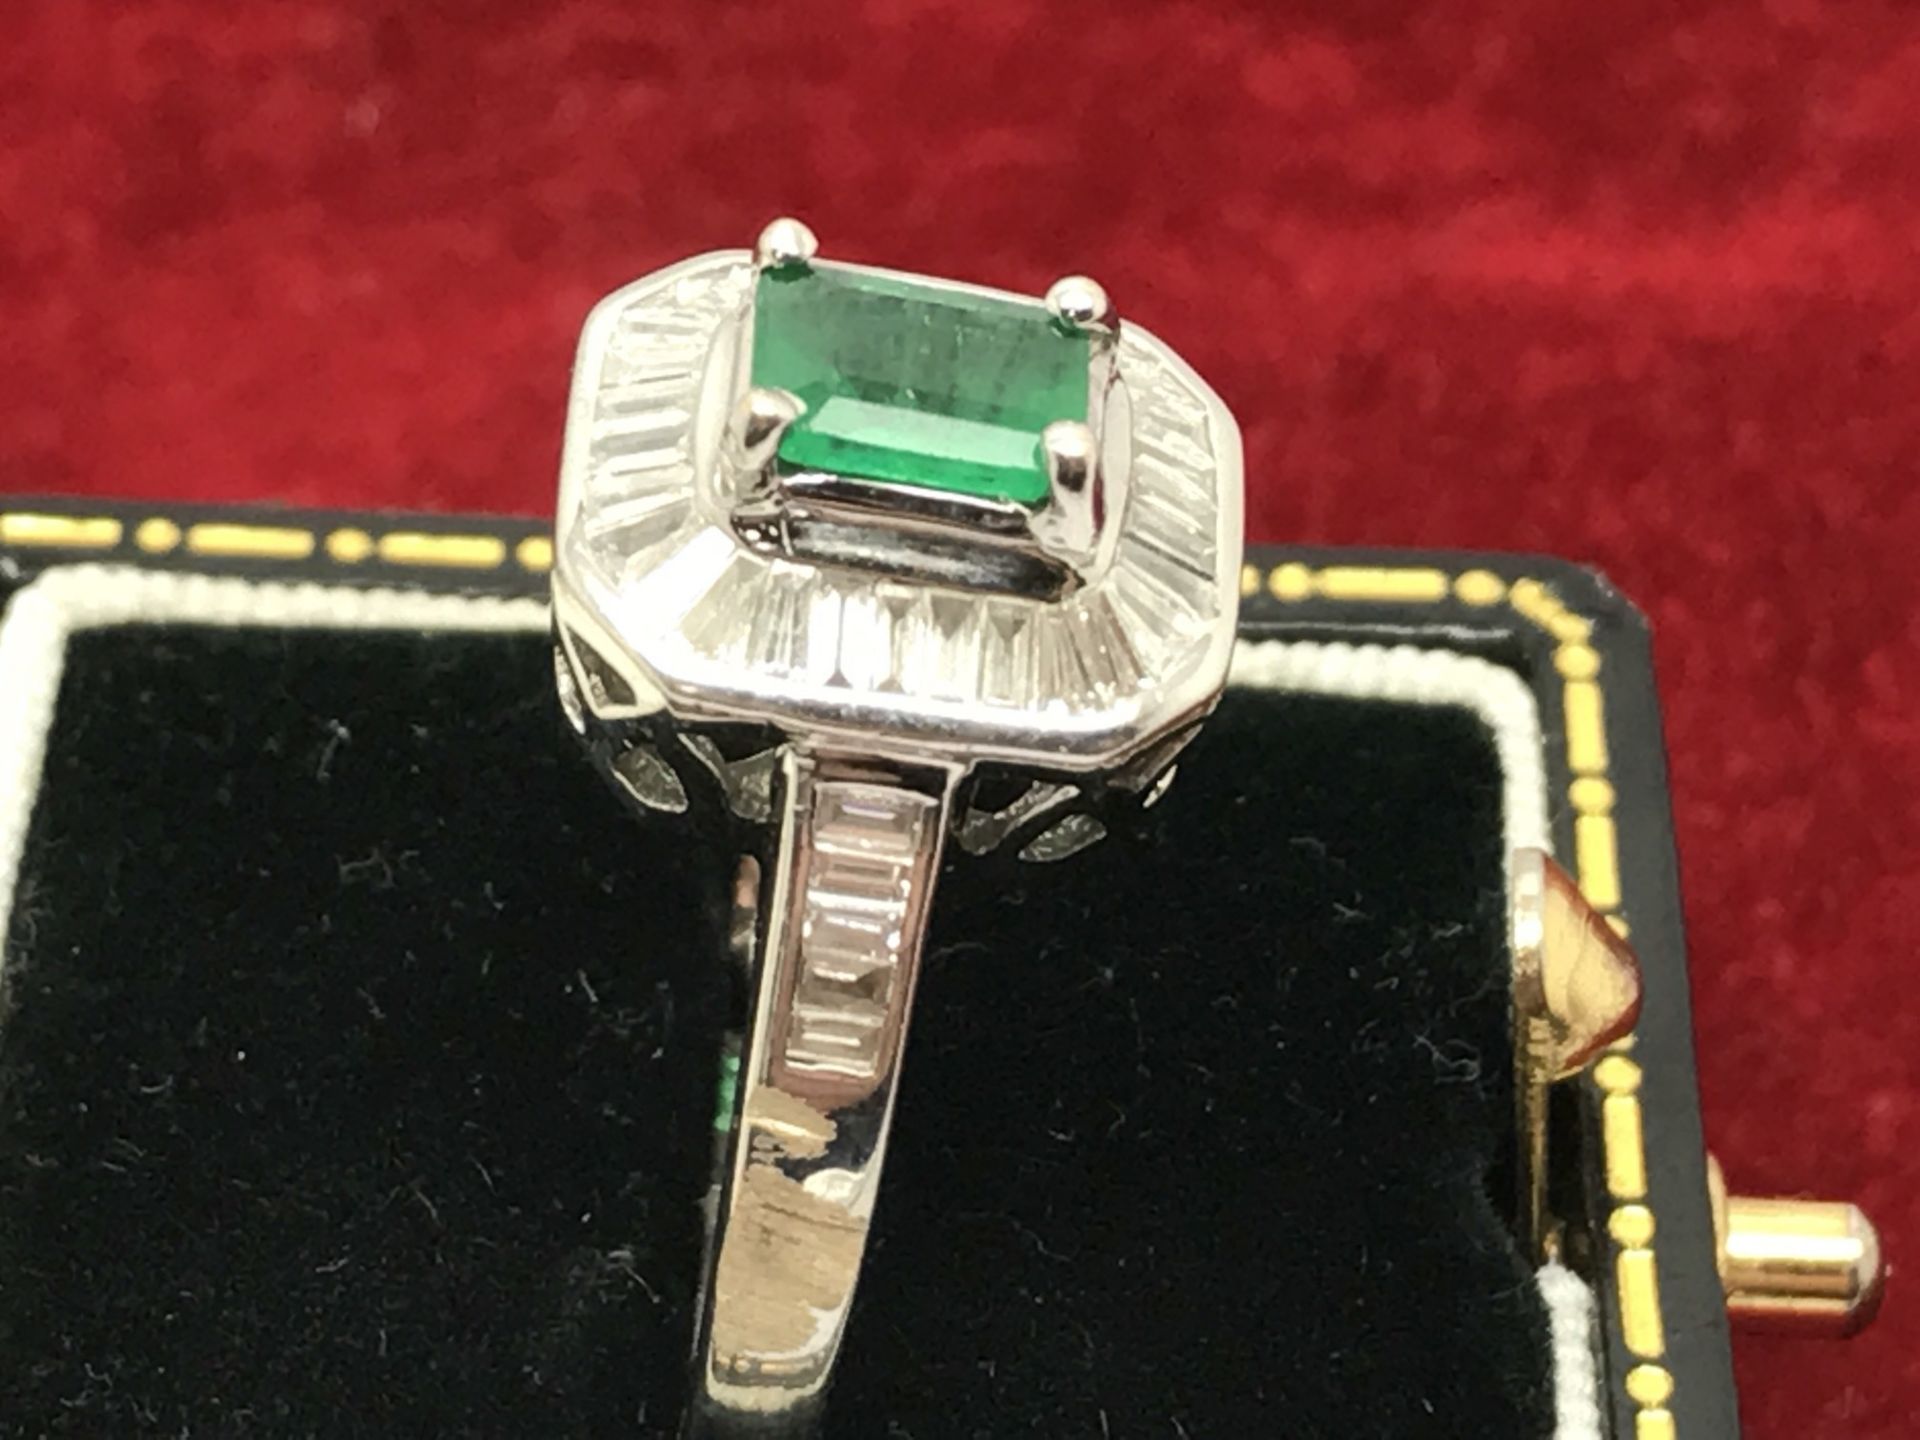 EMERALD & DIAMOND RING SET IN YELLOW METAL TESTED AS 18ct GOLD - Image 3 of 3